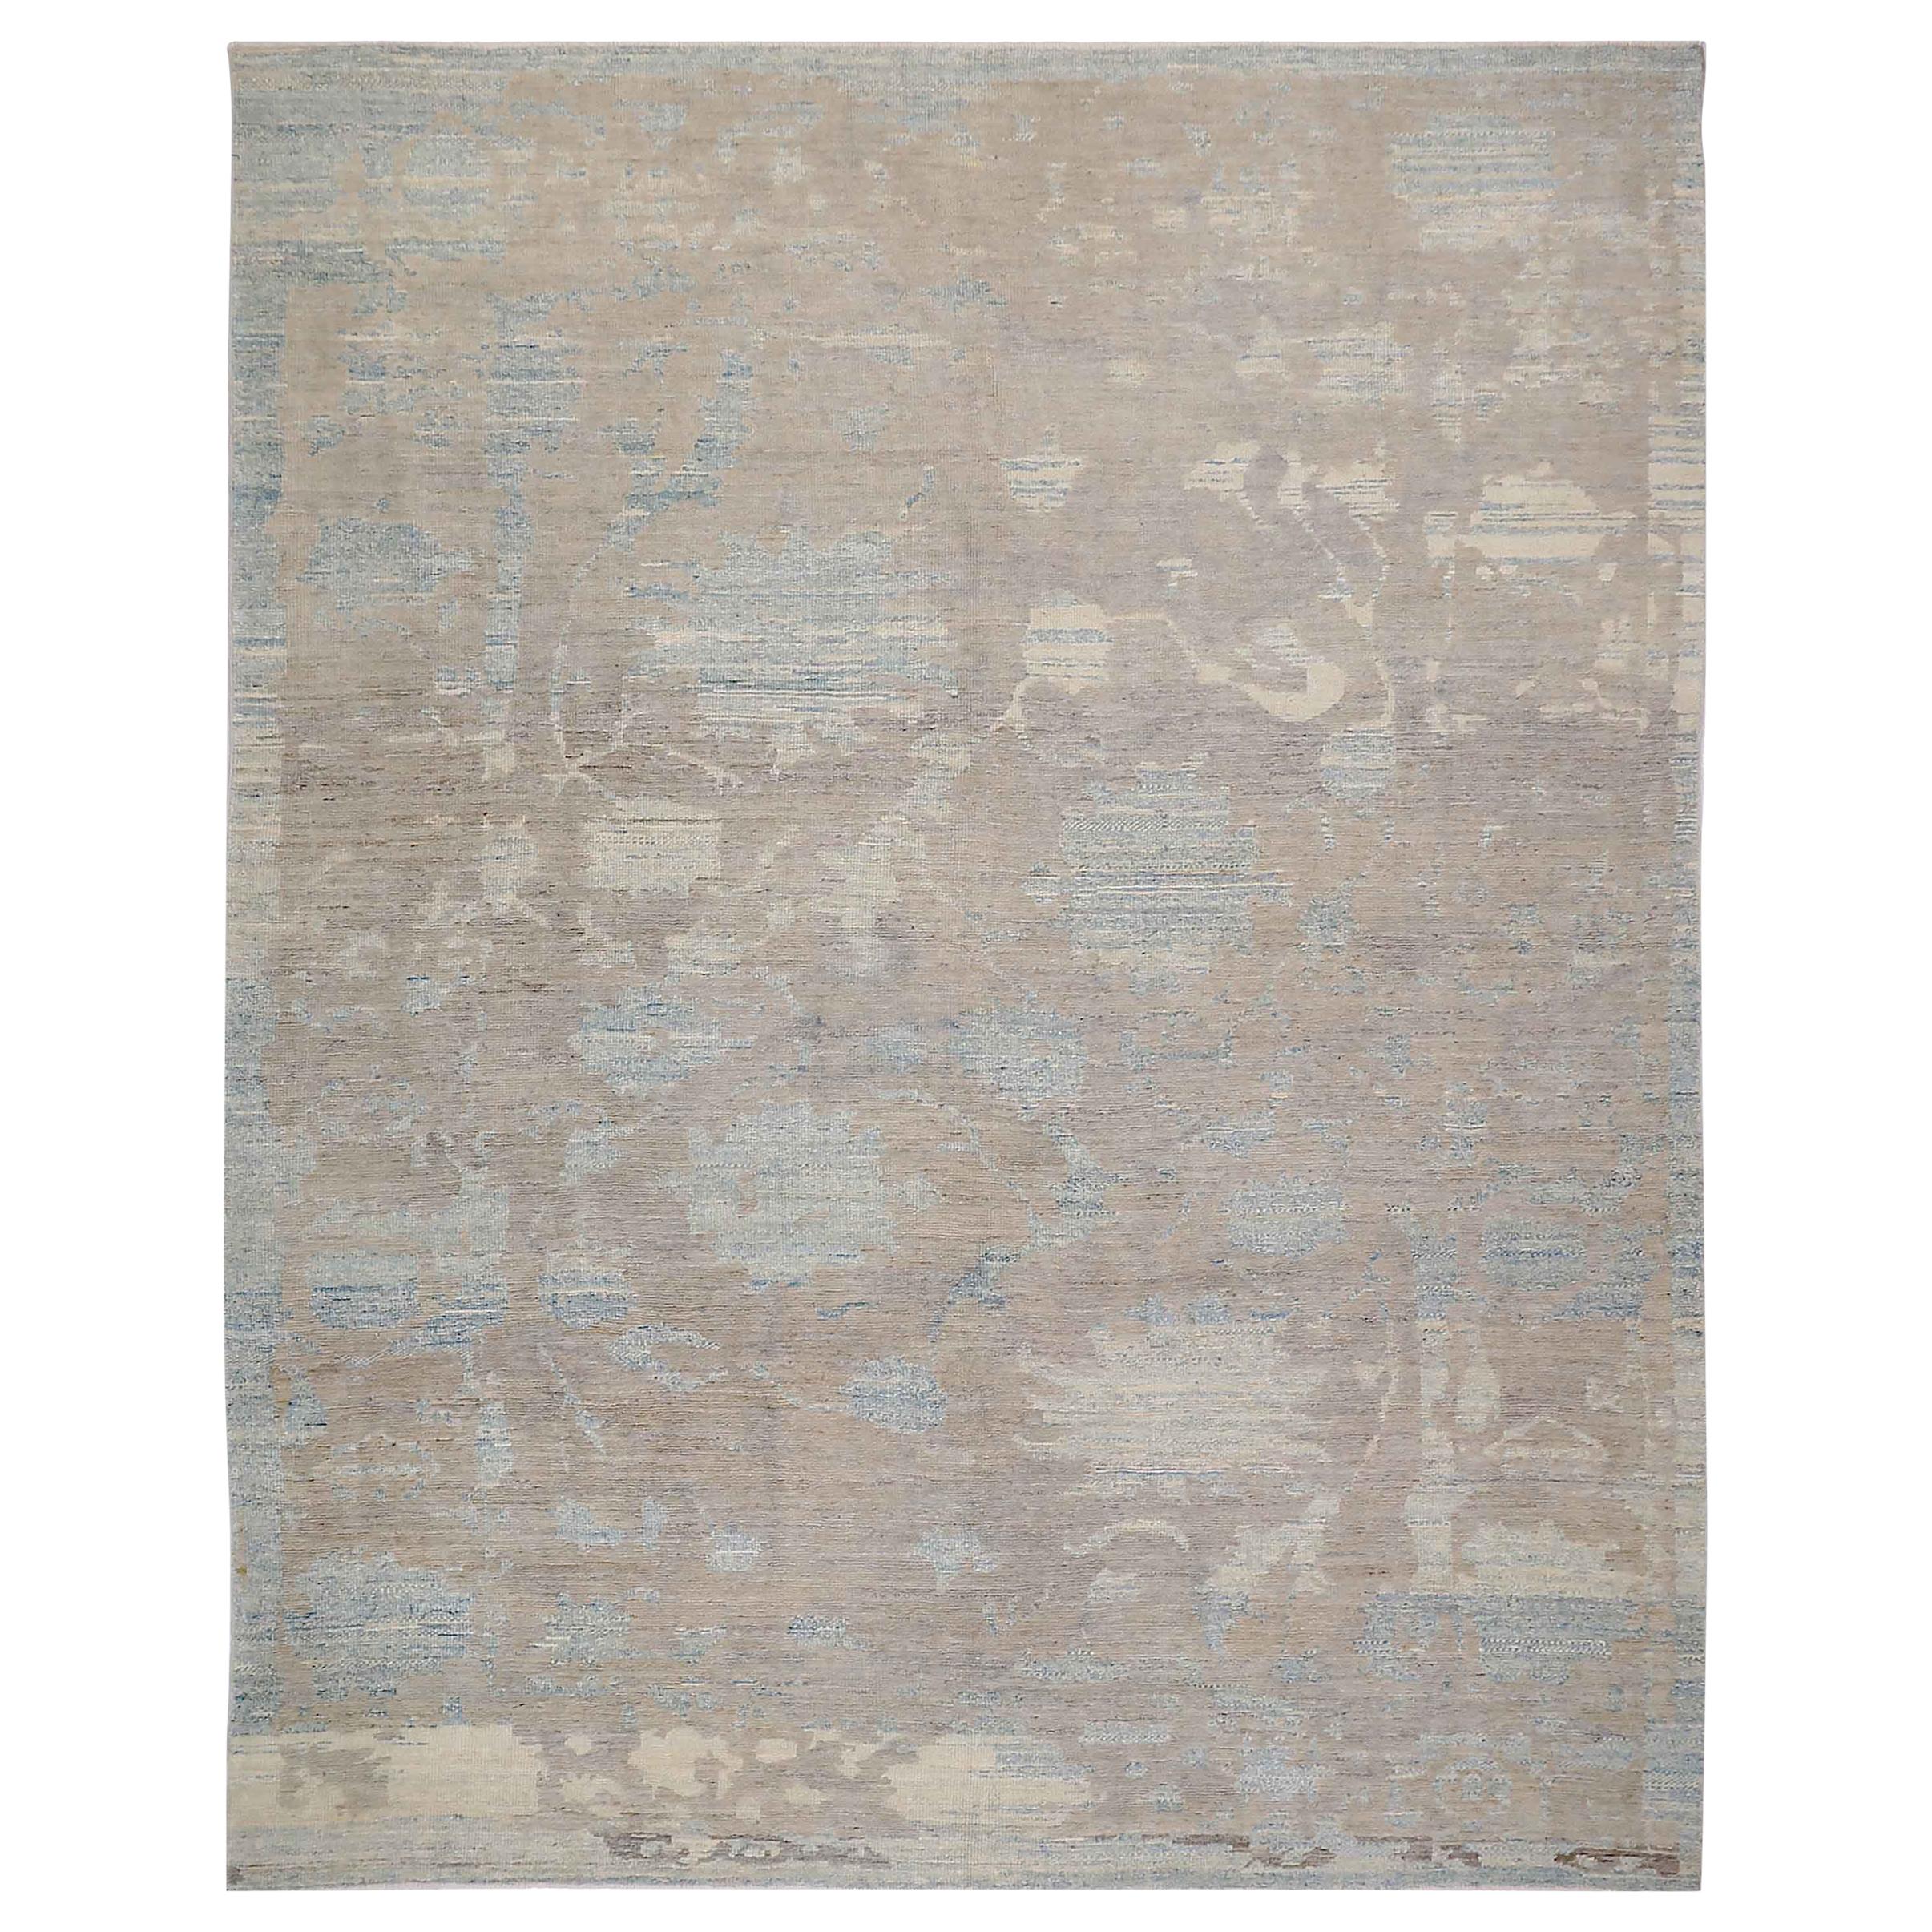 New Turkish Oushak Rug with Brown and Beige Floral Details on Blue Field